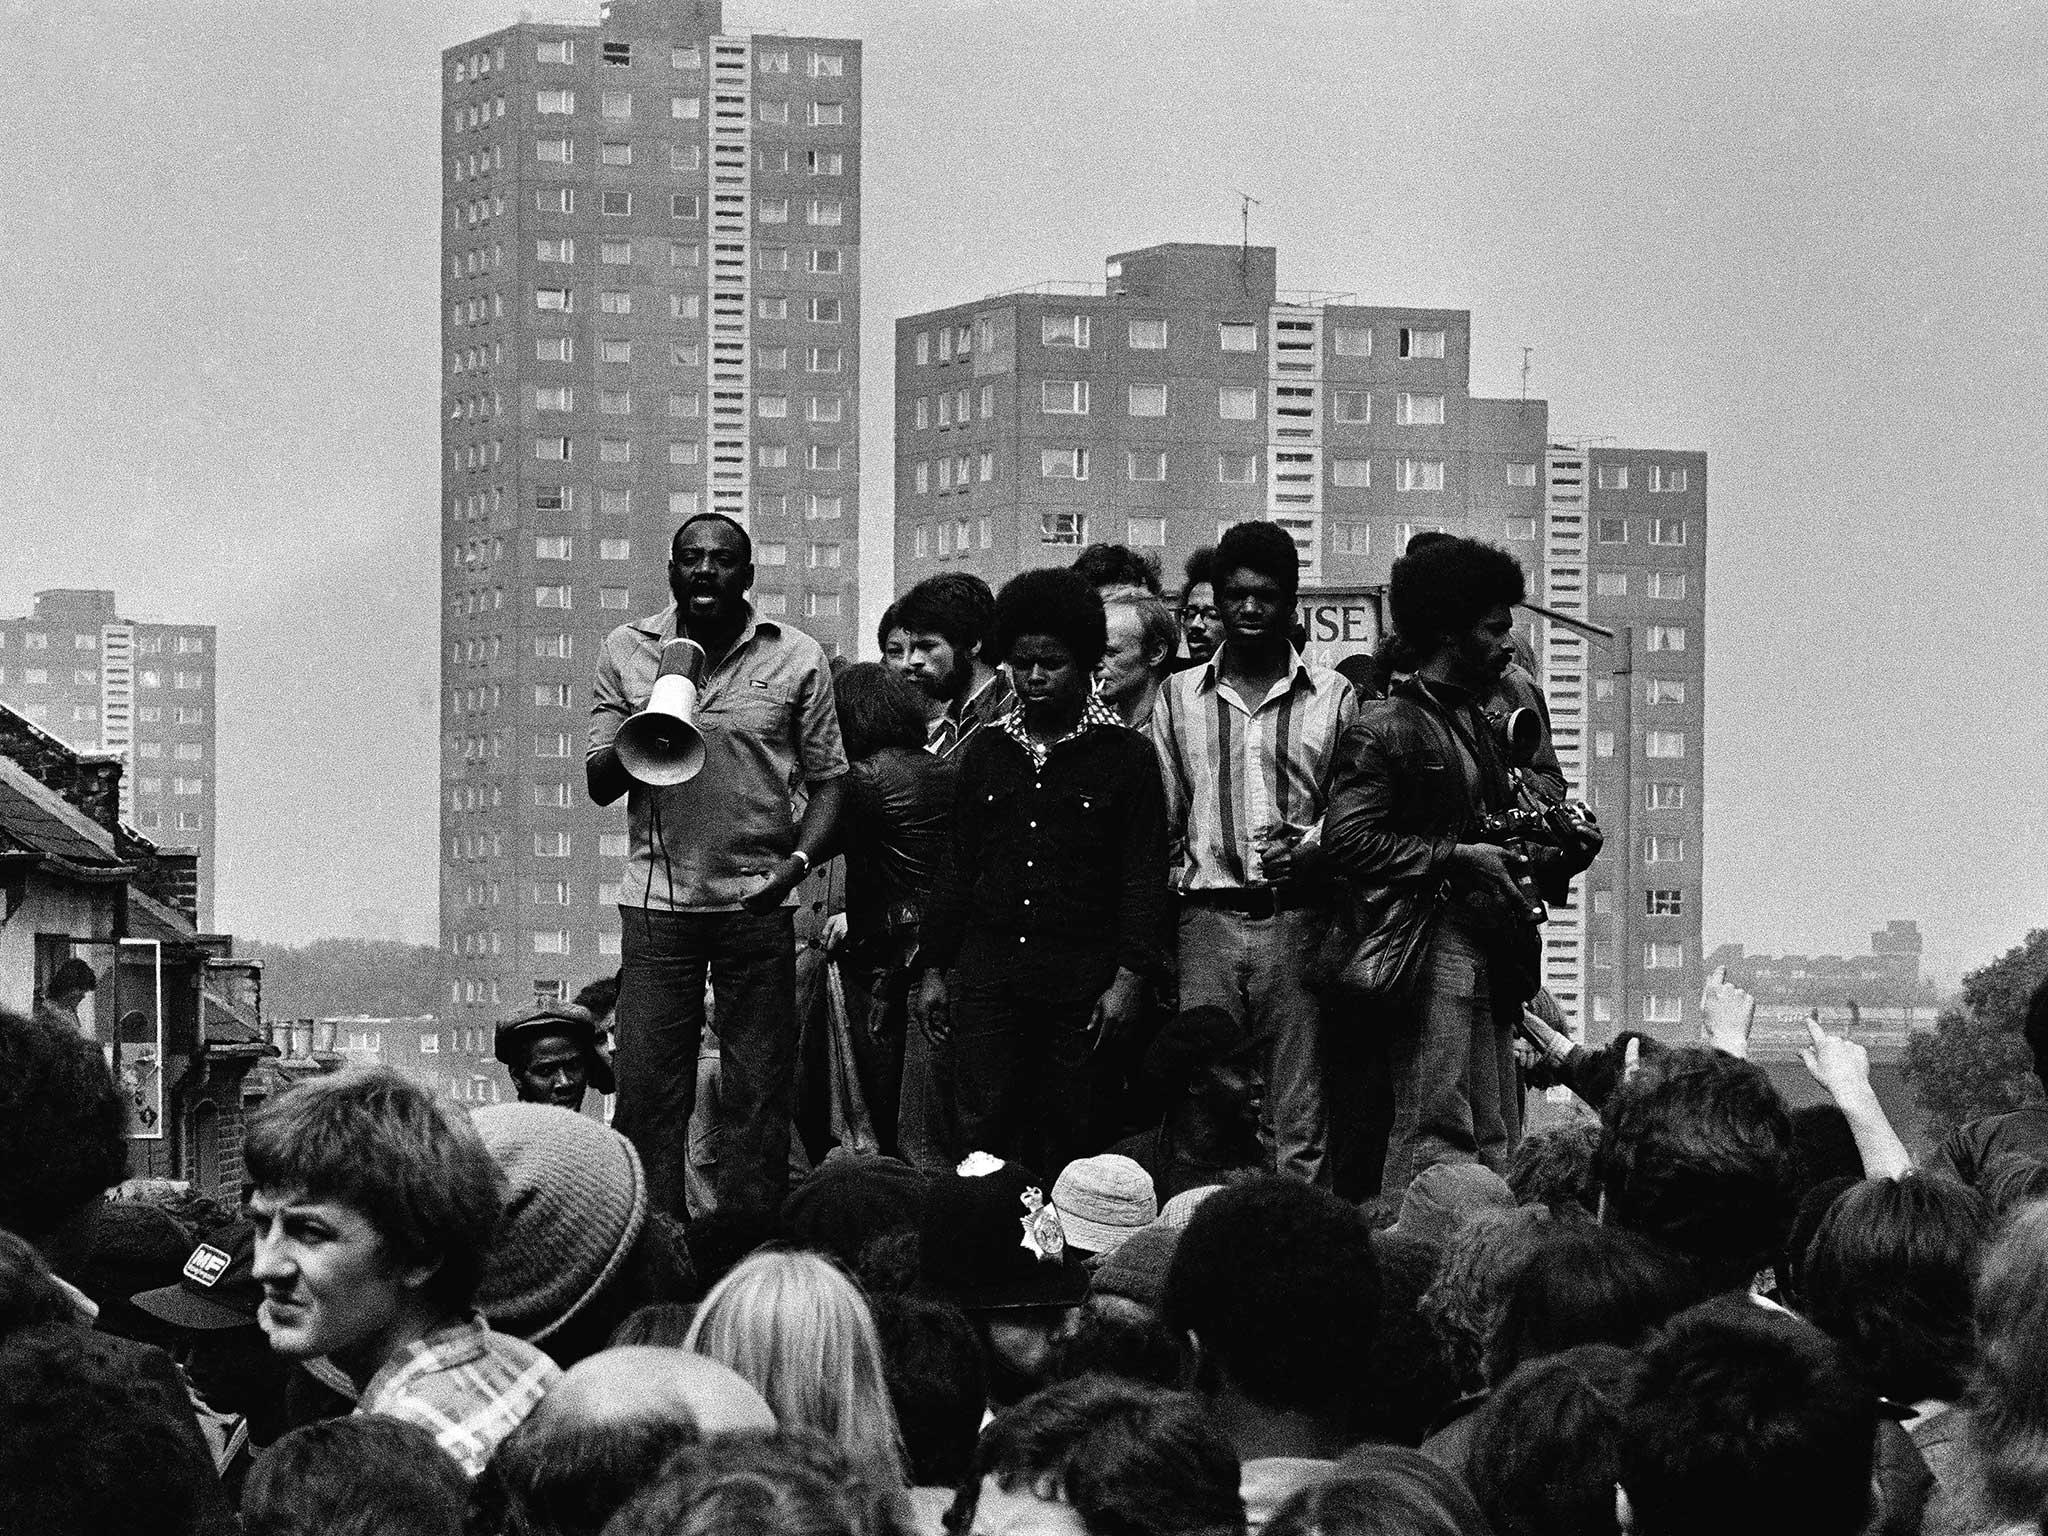 Darcus Howe addresses a public rally in Lewisham, south London in 1977